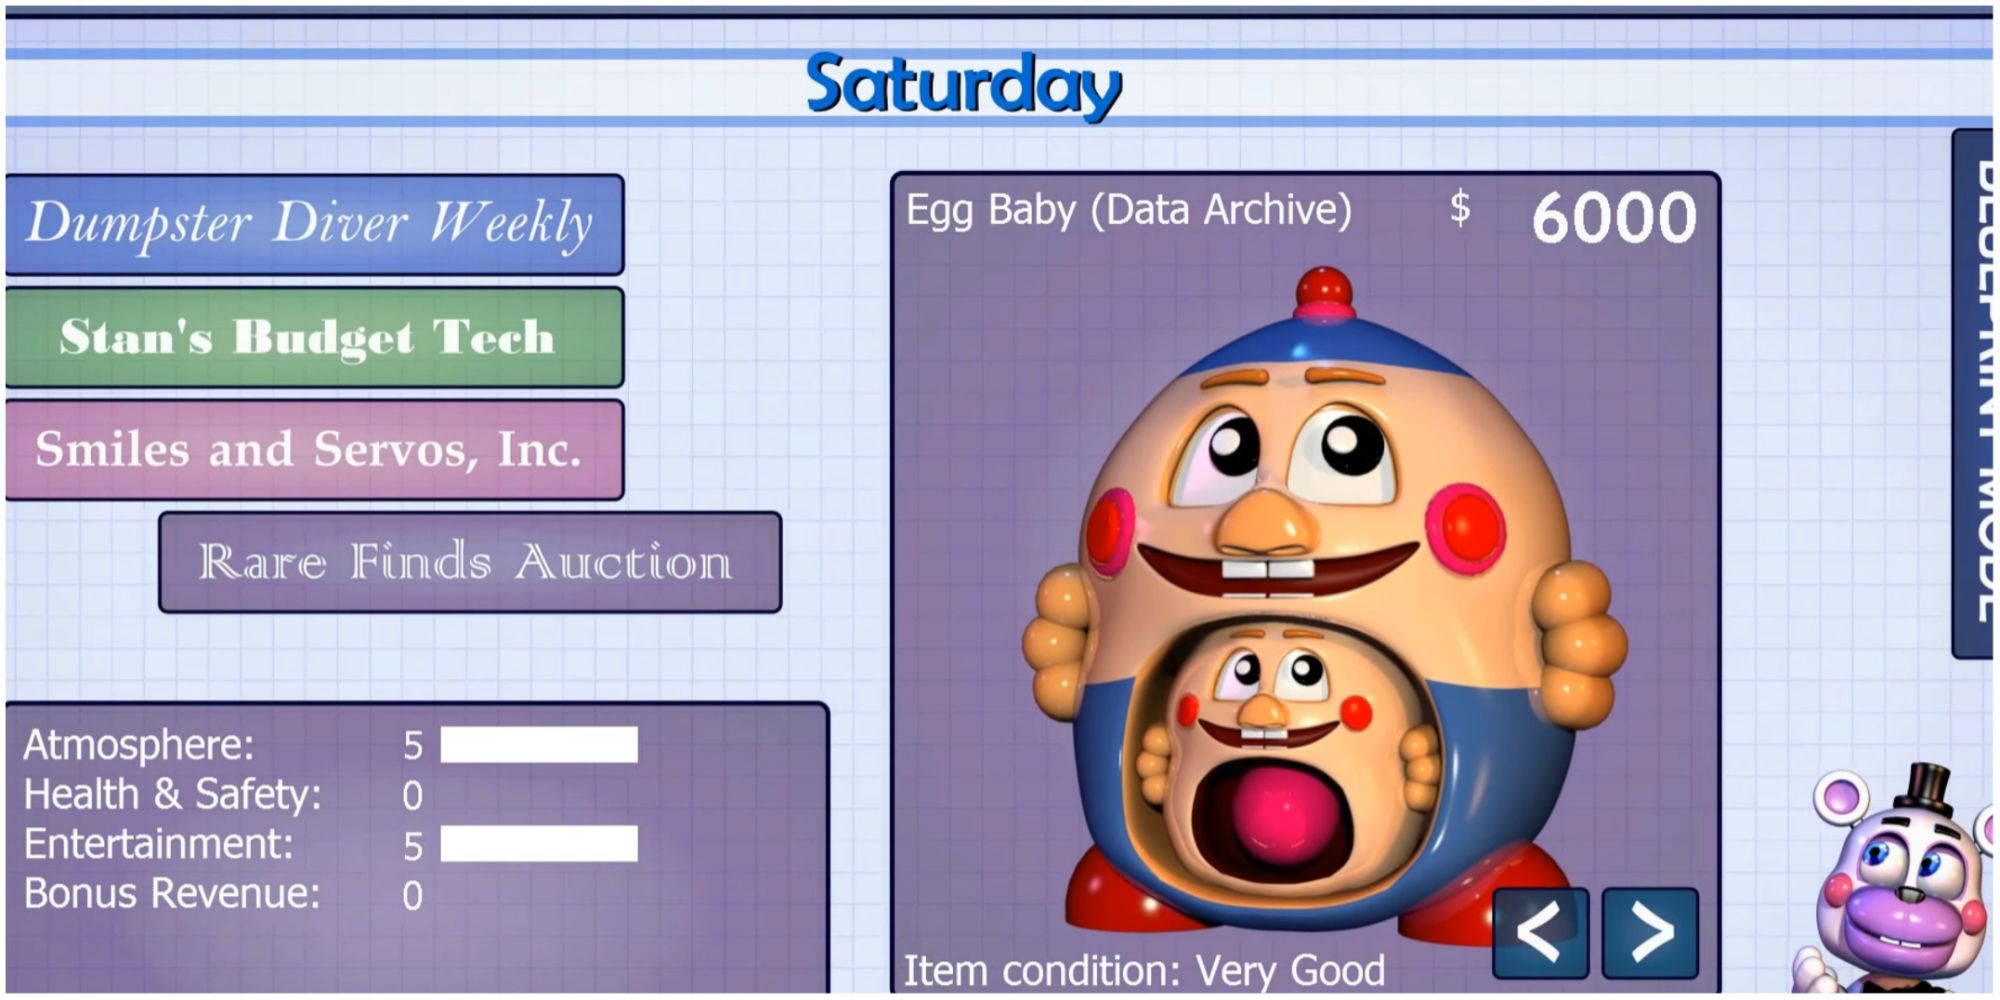 FNAF 6 catalogue listing for Egg Baby (Data Archive) animatronic